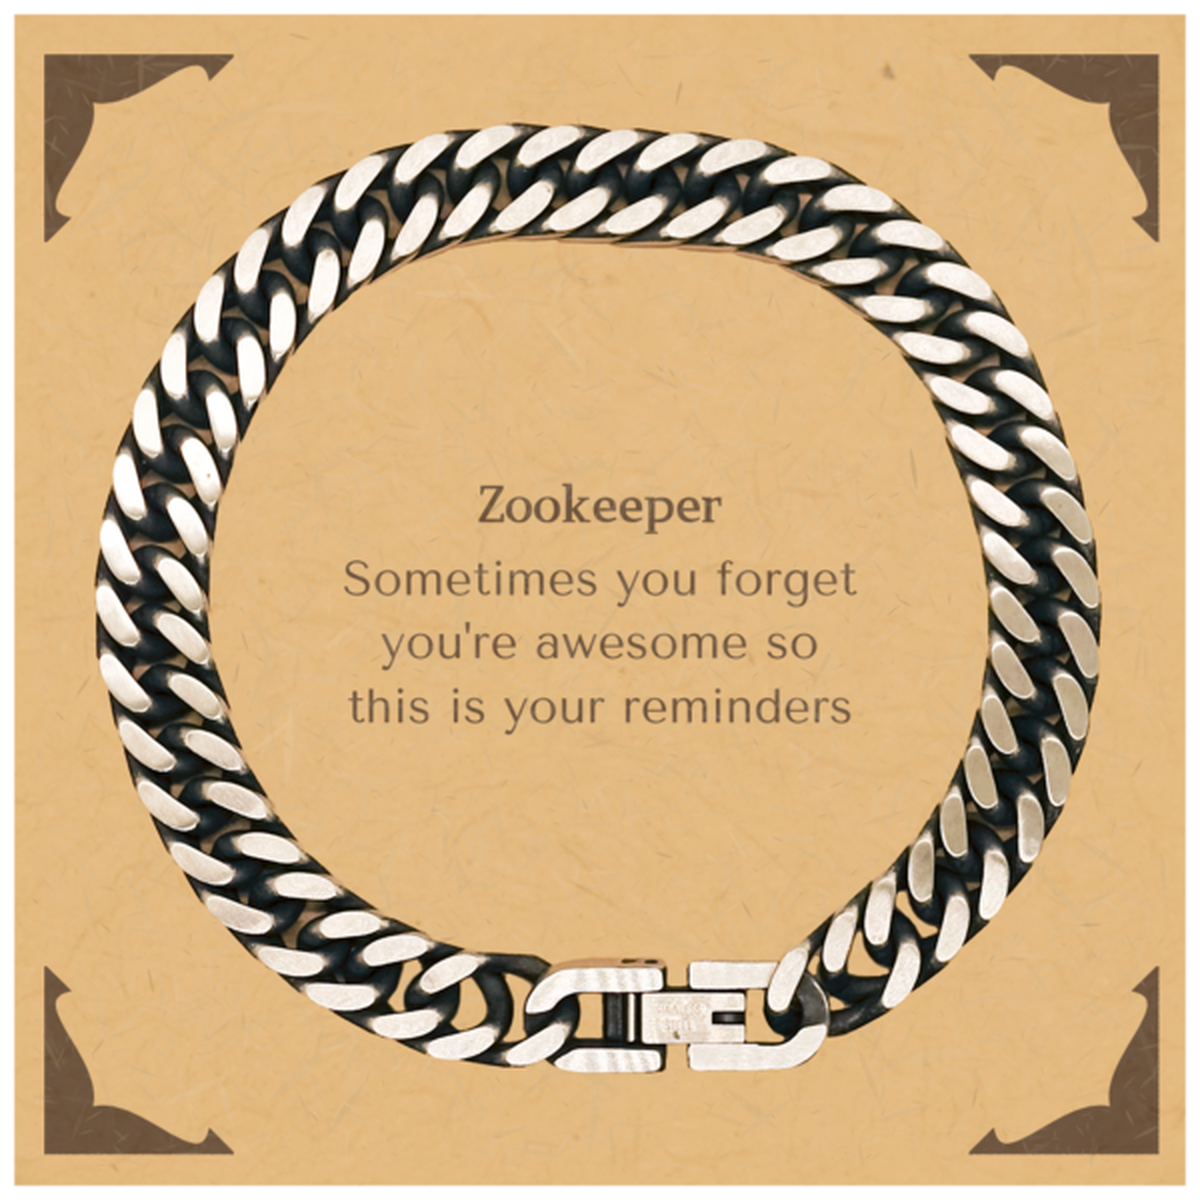 Sentimental Zookeeper Cuban Link Chain Bracelet, Zookeeper Sometimes you forget you're awesome so this is your reminders, Graduation Christmas Birthday Gifts for Zookeeper, Men, Women, Coworkers